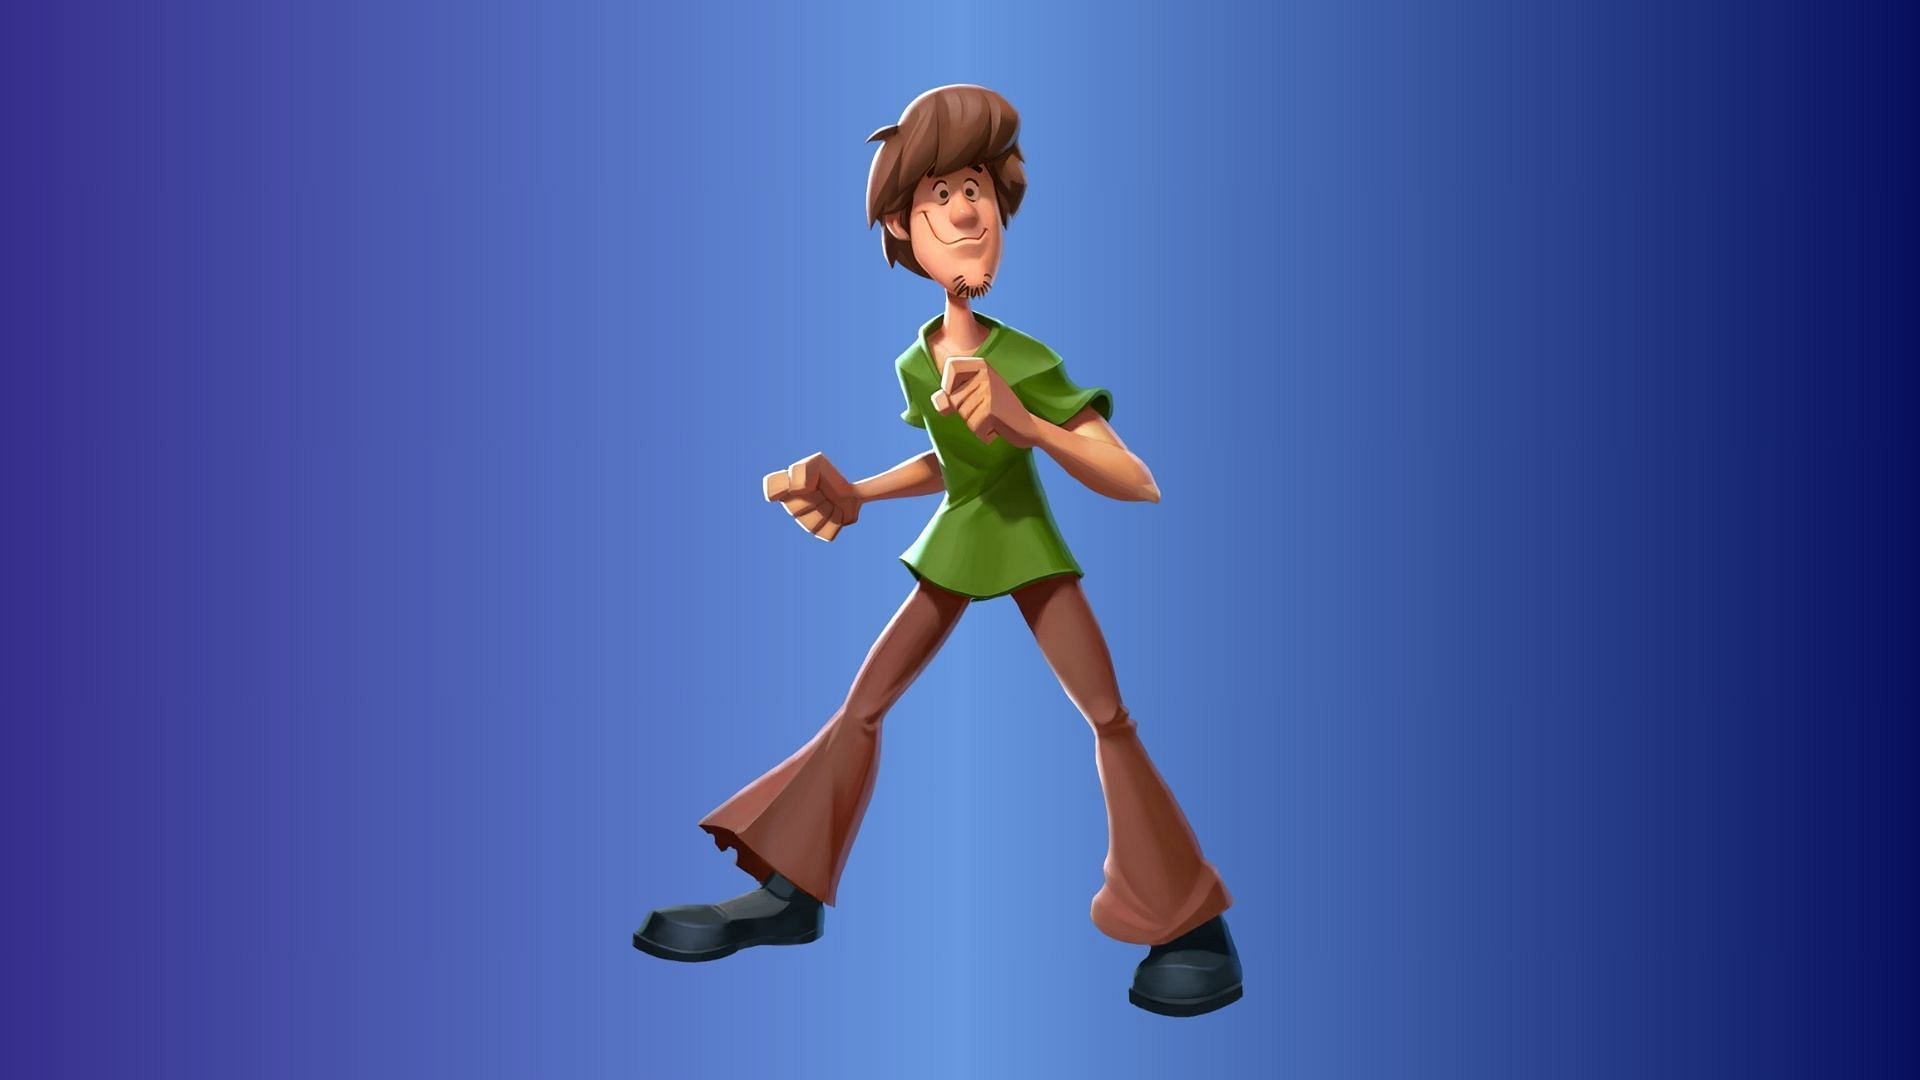 Shaggy has easy-to-use combos and projectiles in MultiVersus (Image via Warner Bros)